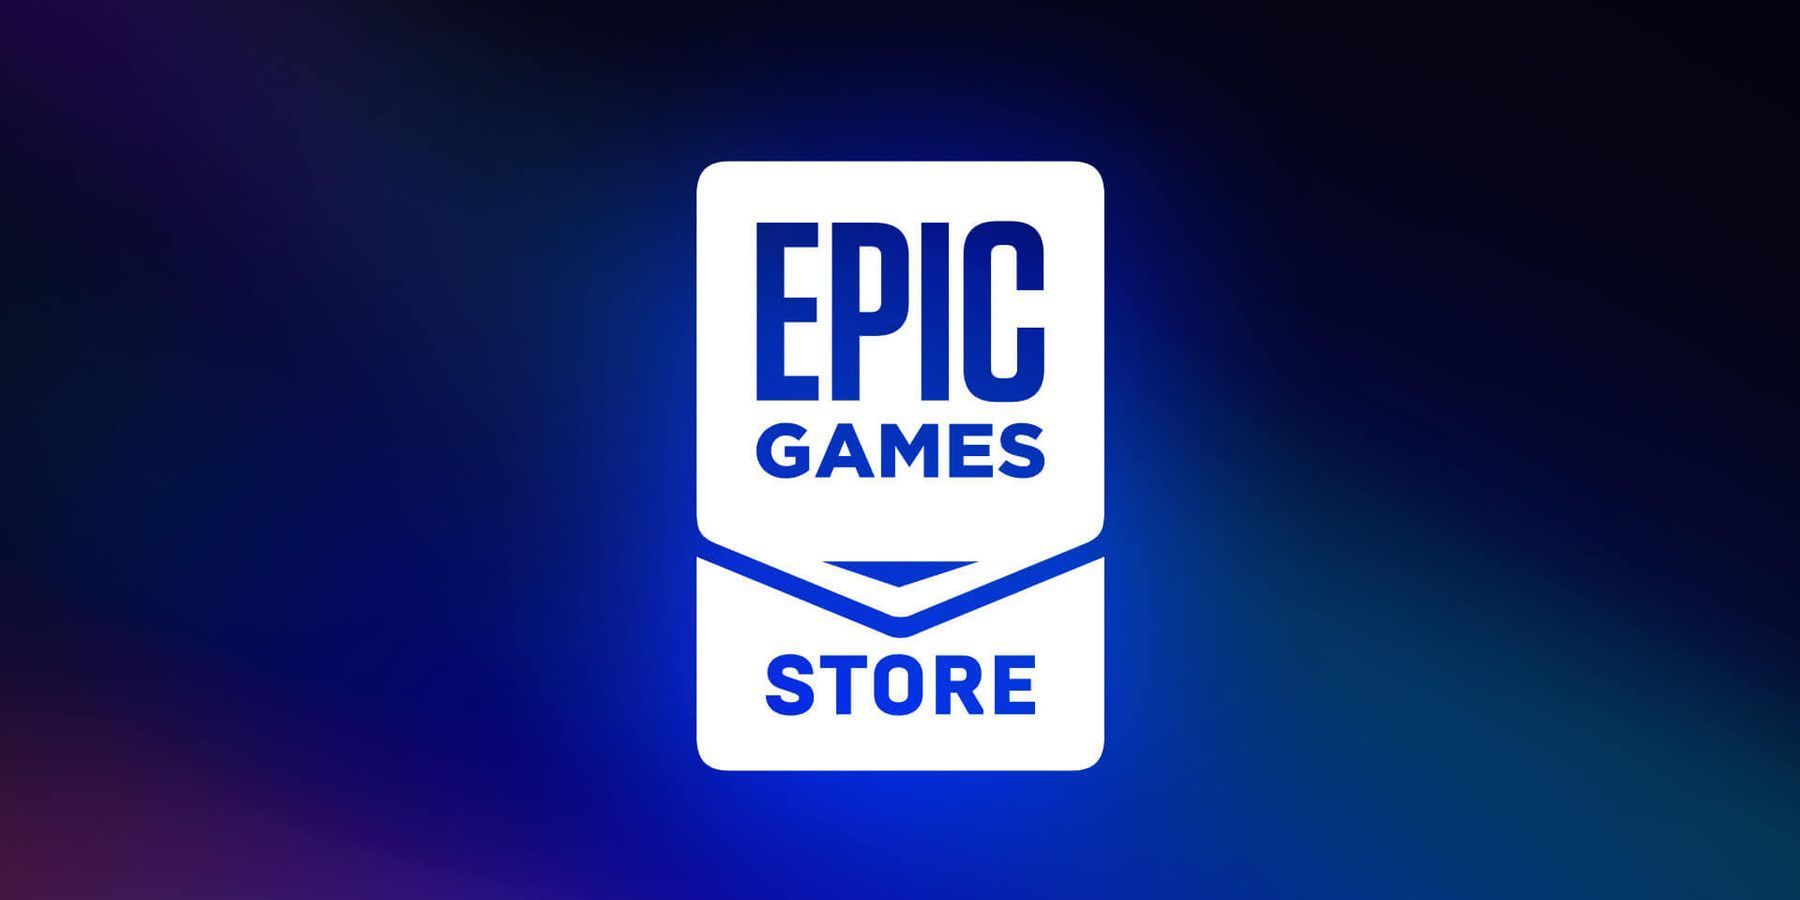 3 free games from the Epic Games Store until January 19, 2023 - News by  Xiaomi Miui Hellas